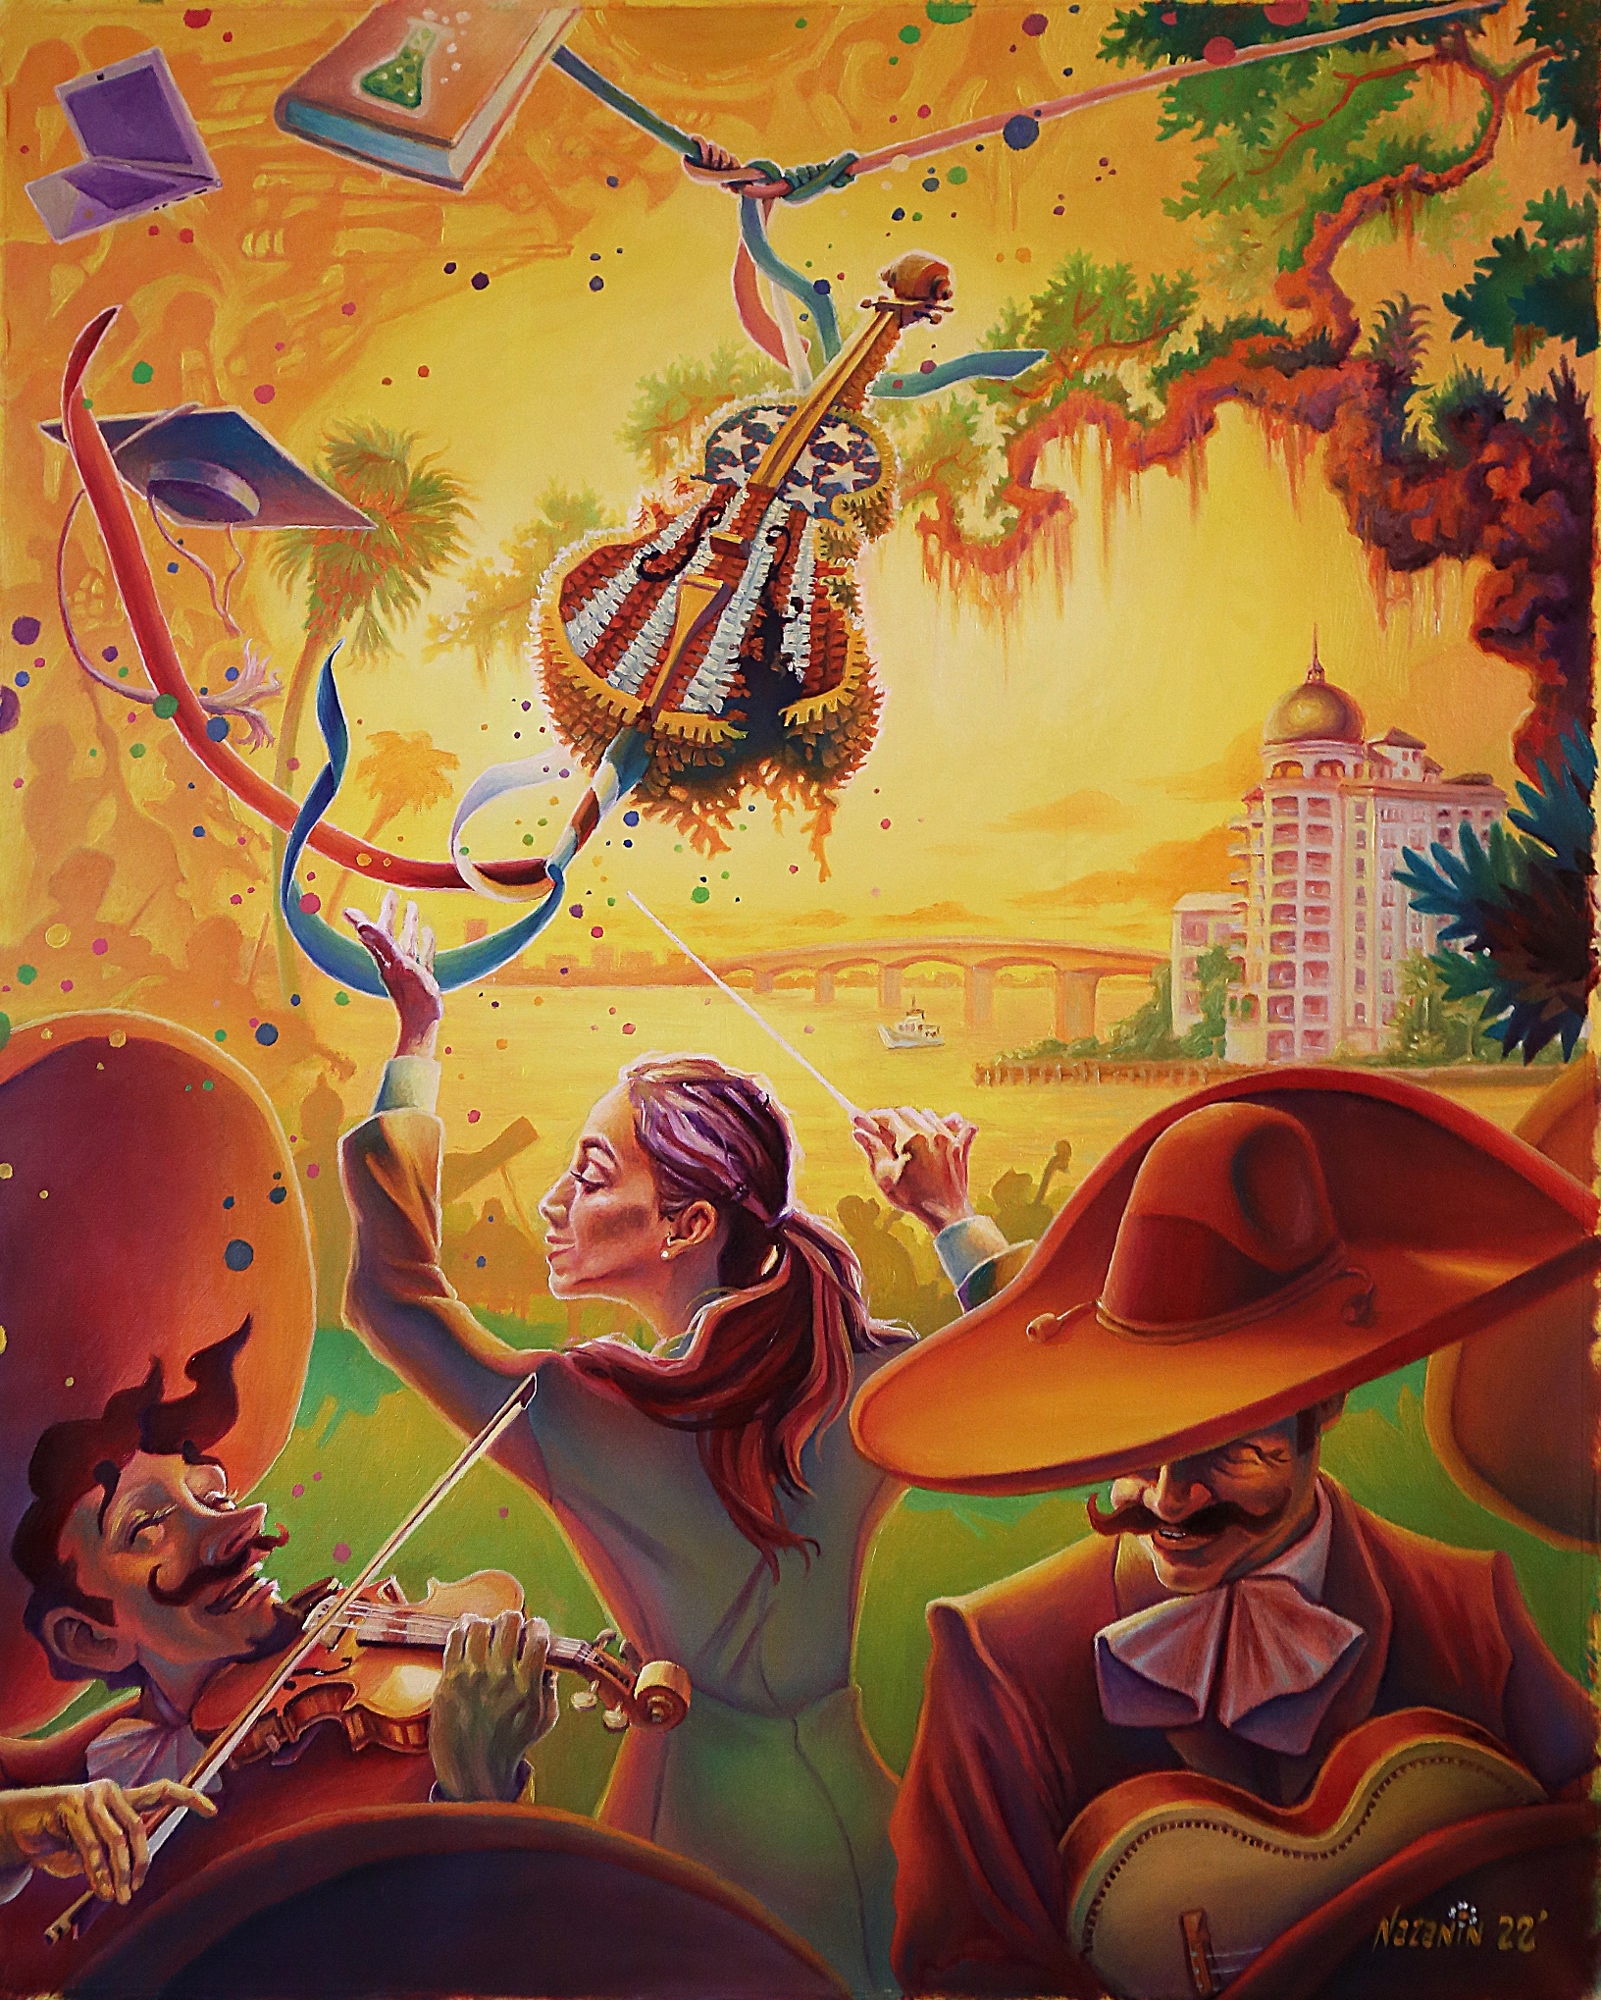 This painting by Yulner Diaz will be auctioned off at the Friday evening performance of NocheUnidos. (Courtesy photo)